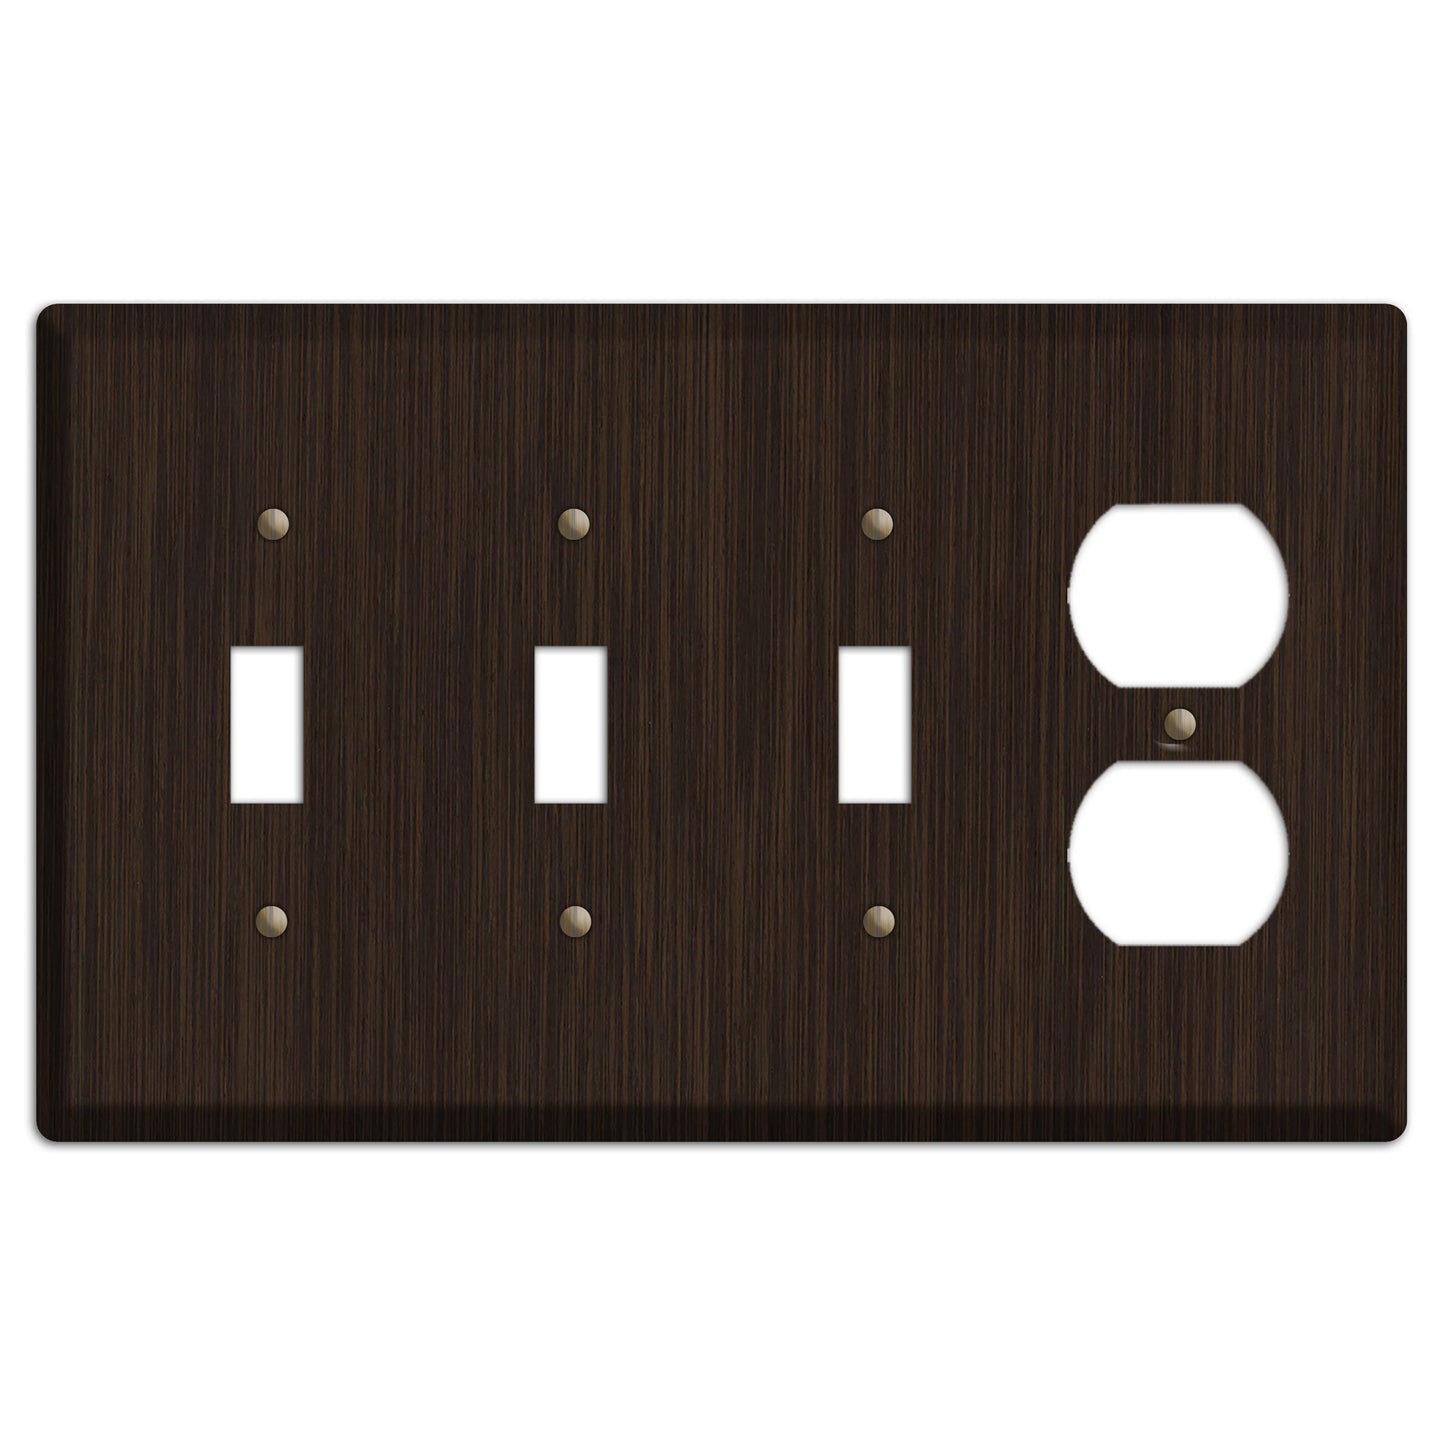 Wenge Wood 3 Toggle / Duplex Outlet Cover Plate